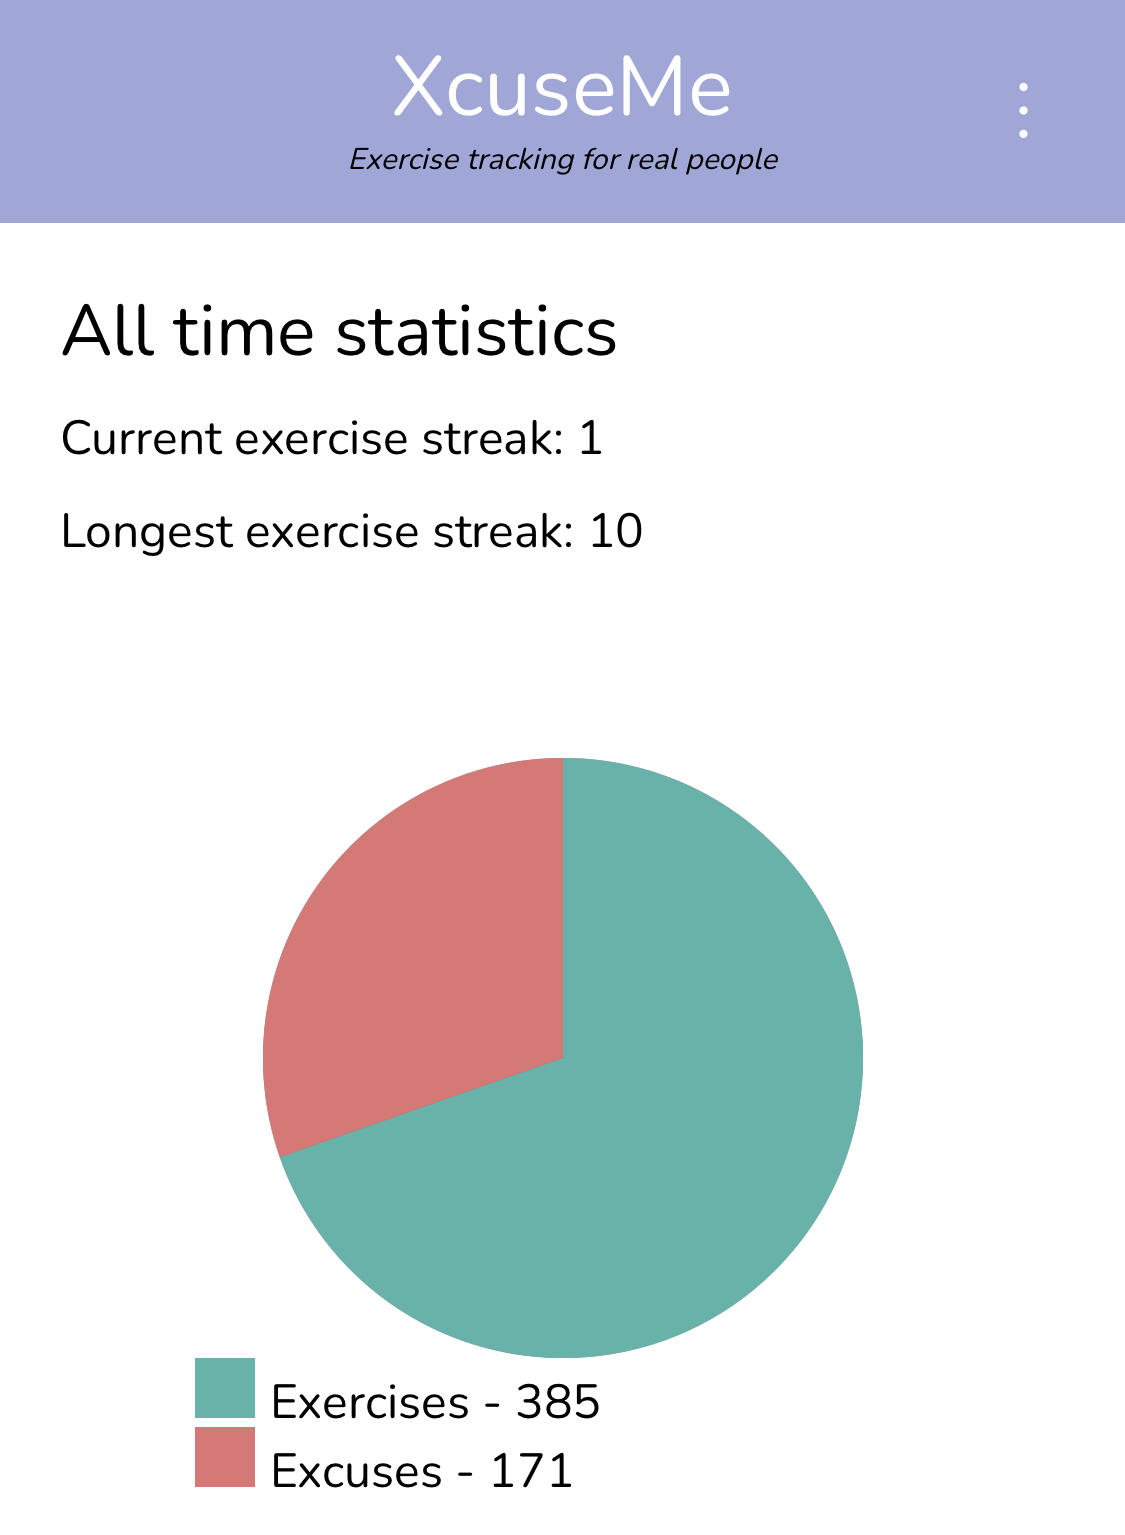 A pie chart showing the proportion of excuses and exercises